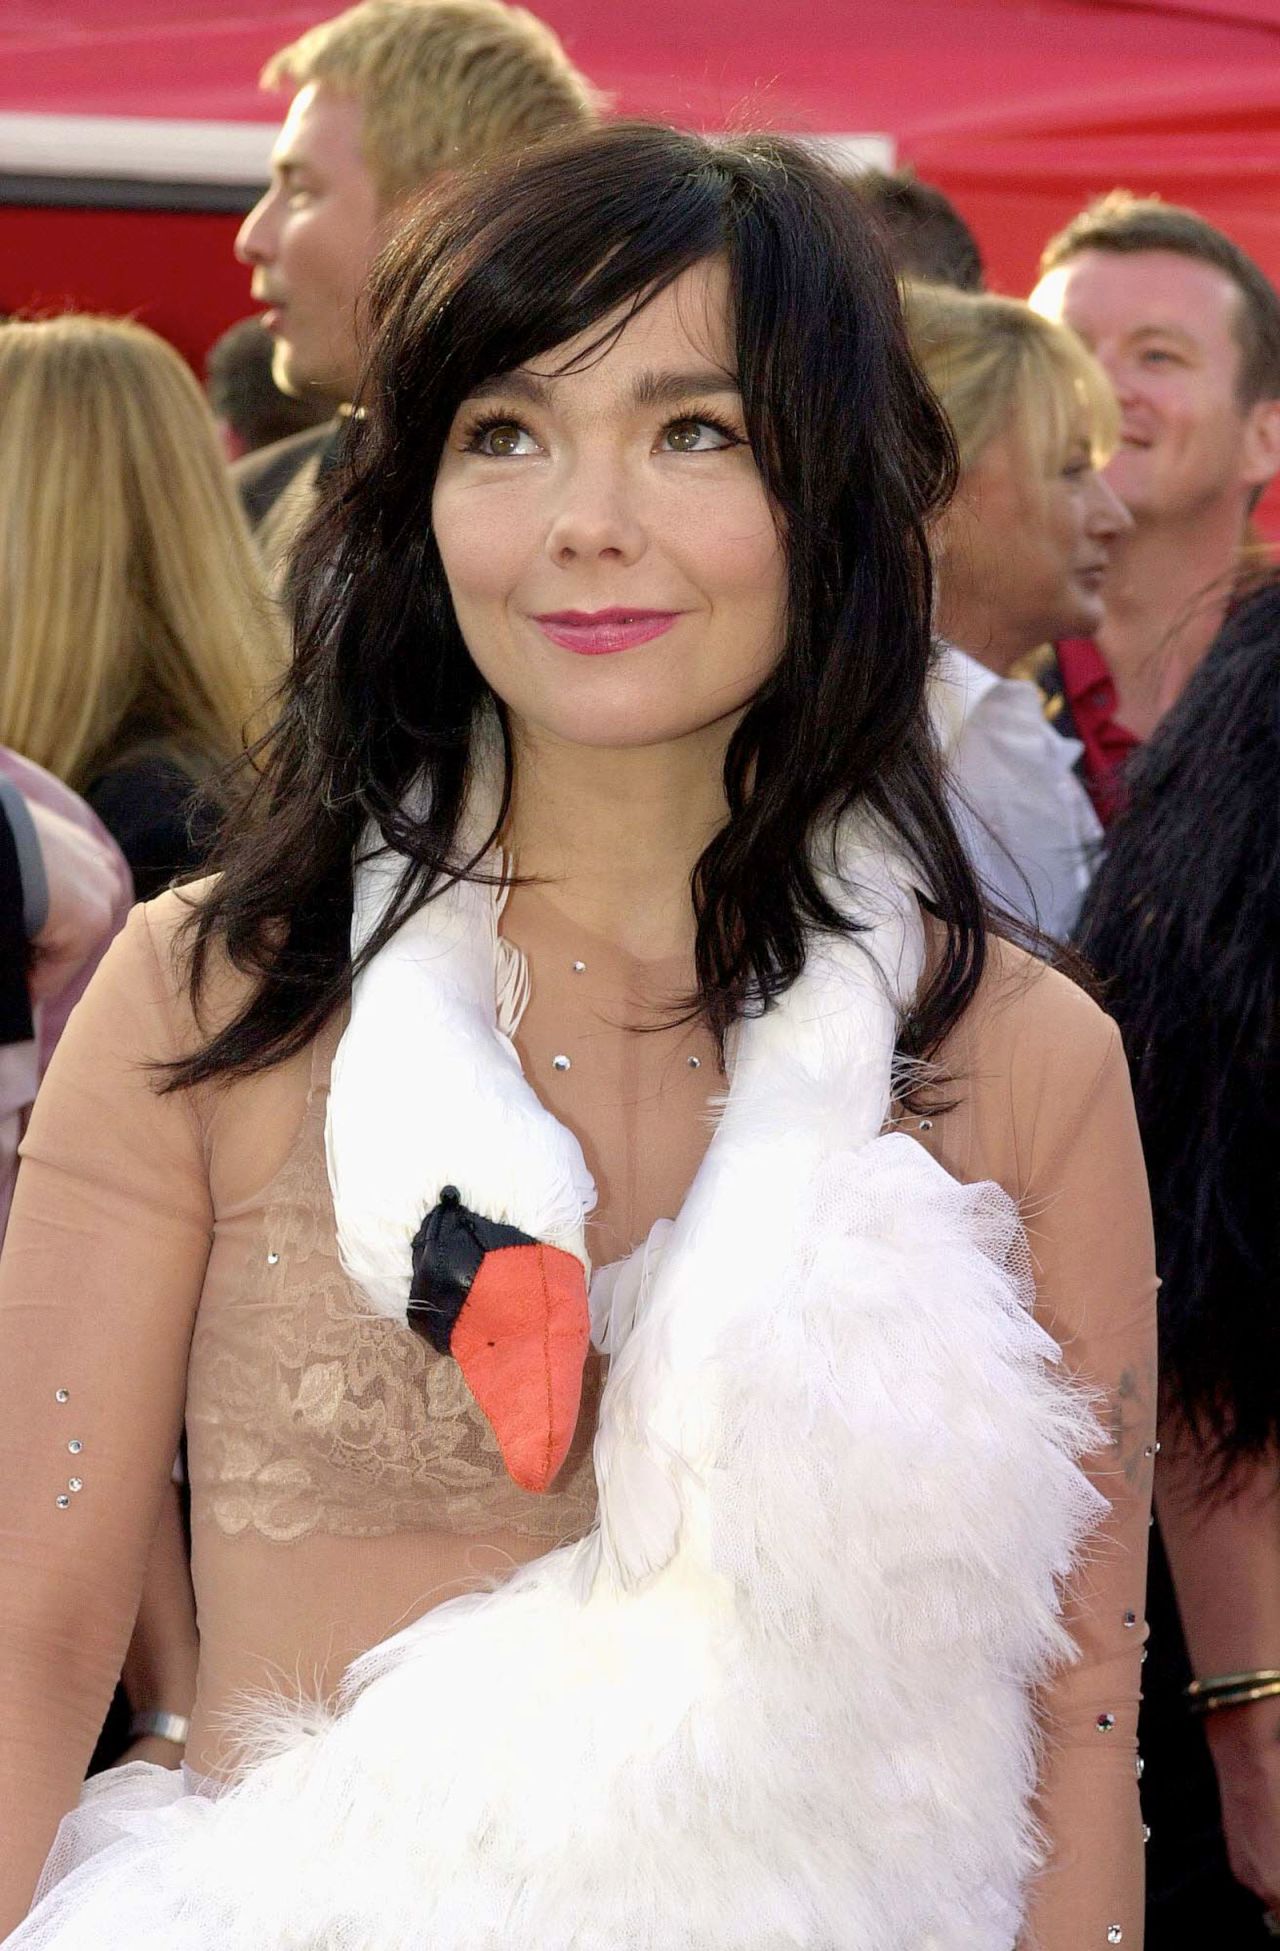 Icelandic actress and singer Bjork arrives at the 73rd Annual Academy Awards 25 March 2001 at the Shrine Auditorium in Los Angeles, CA. 